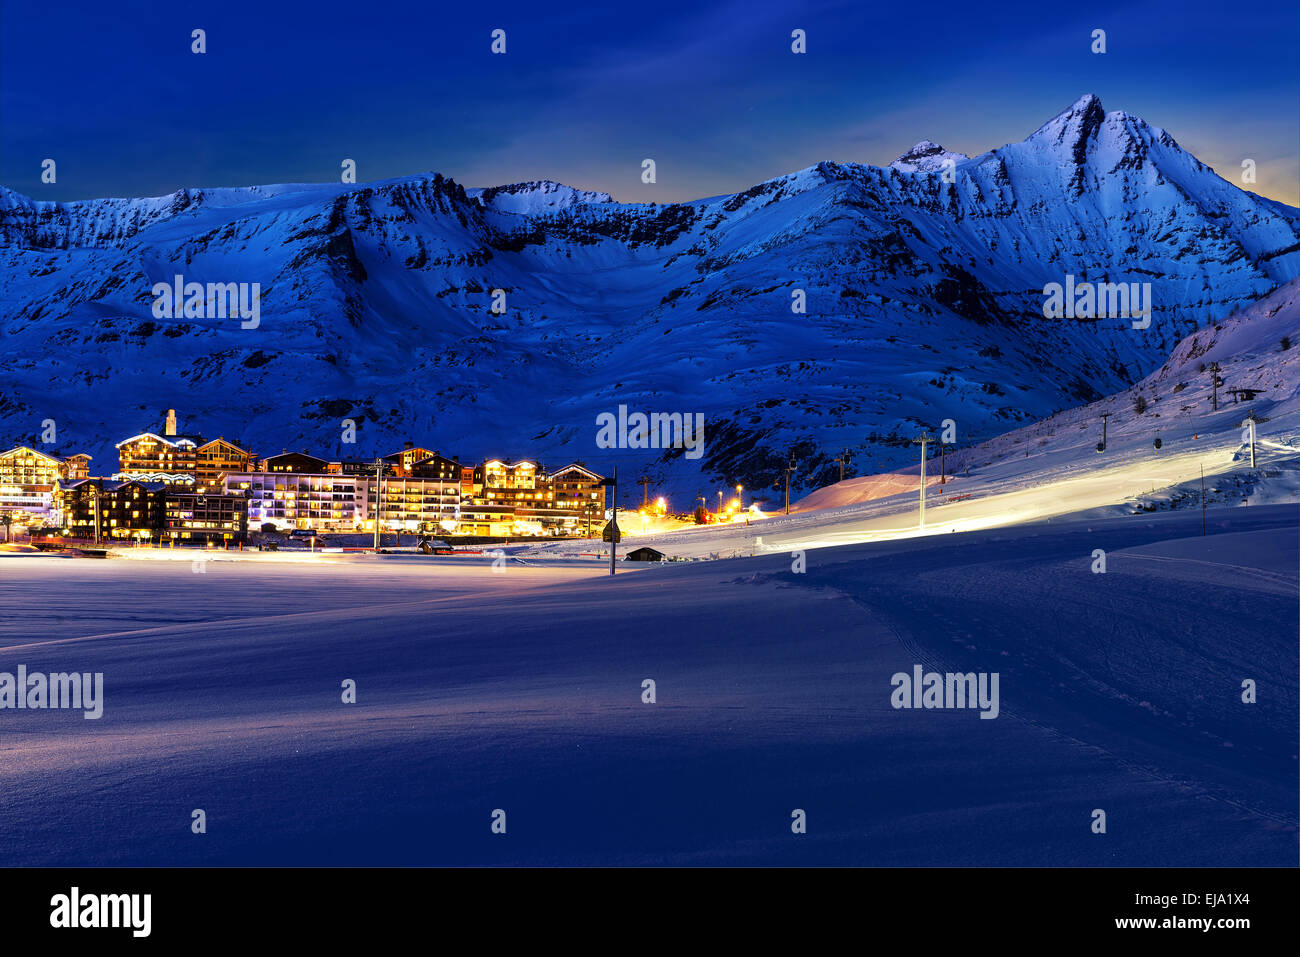 Evening landscape and ski resort in French Alps,Tignes, Tarentaise, France Stock Photo